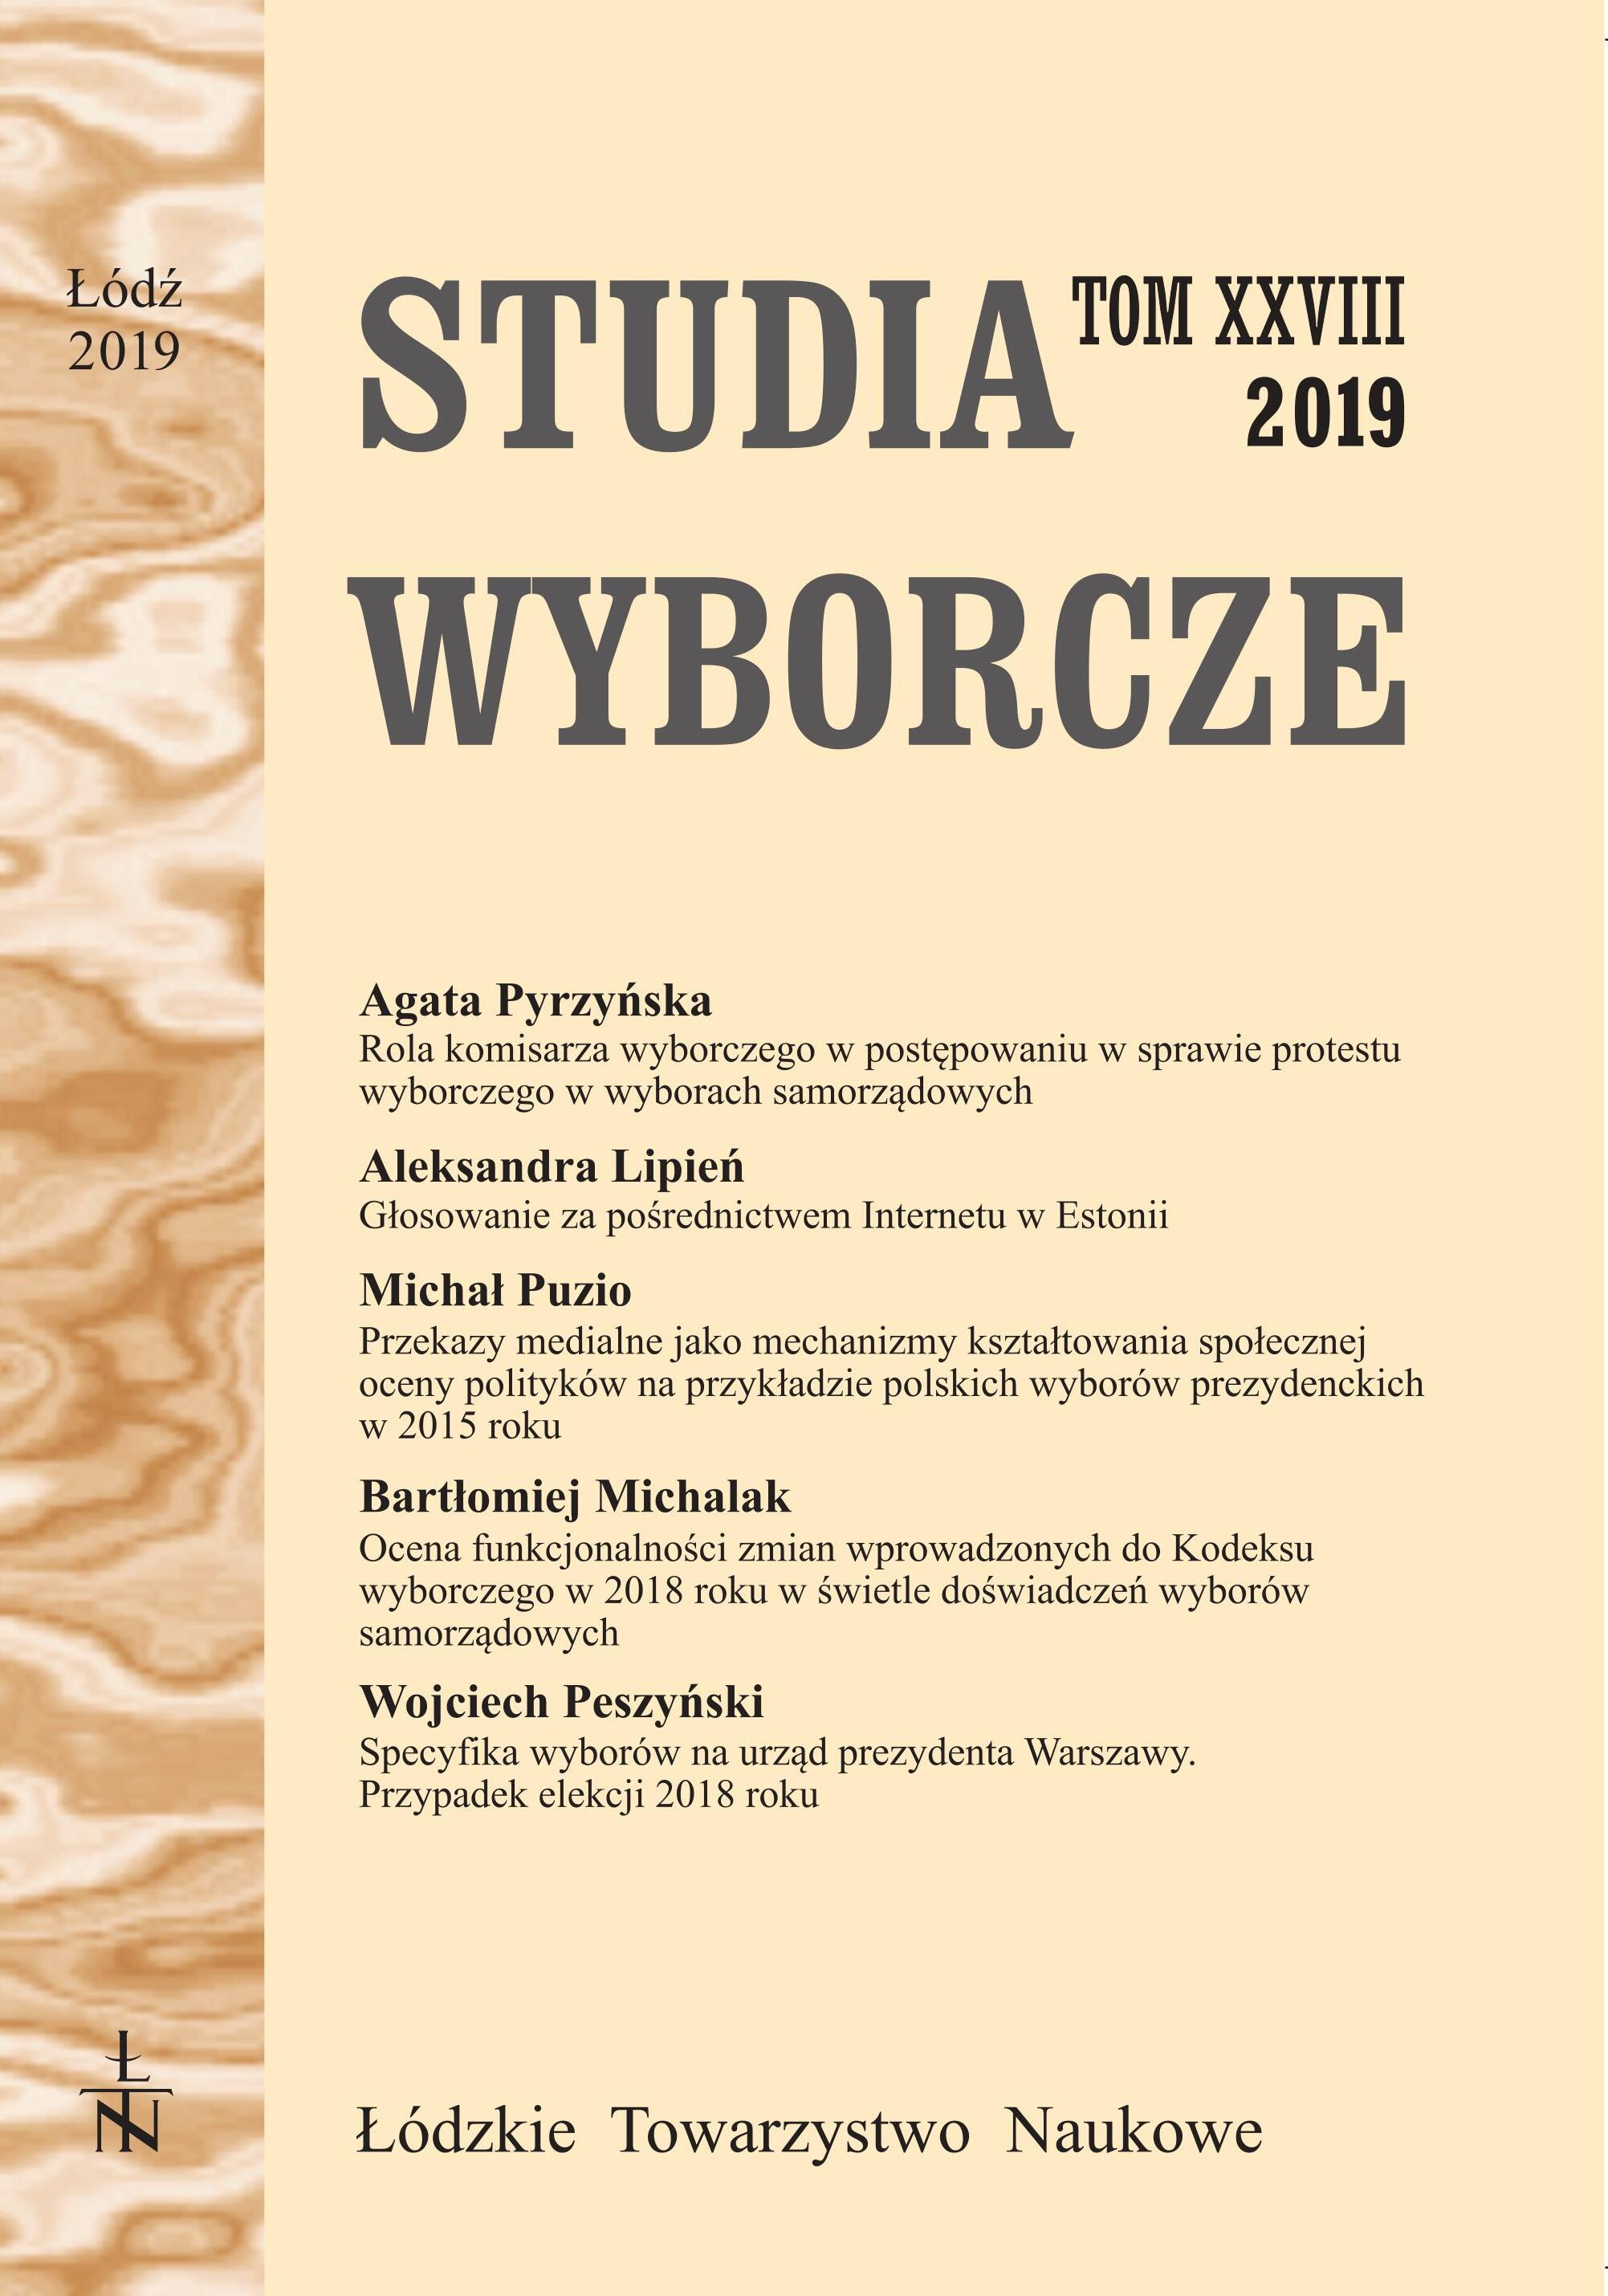 The assessment of functionality of 2018 changes to the Polish electoral code in the light of experience from the latest local government elections Cover Image